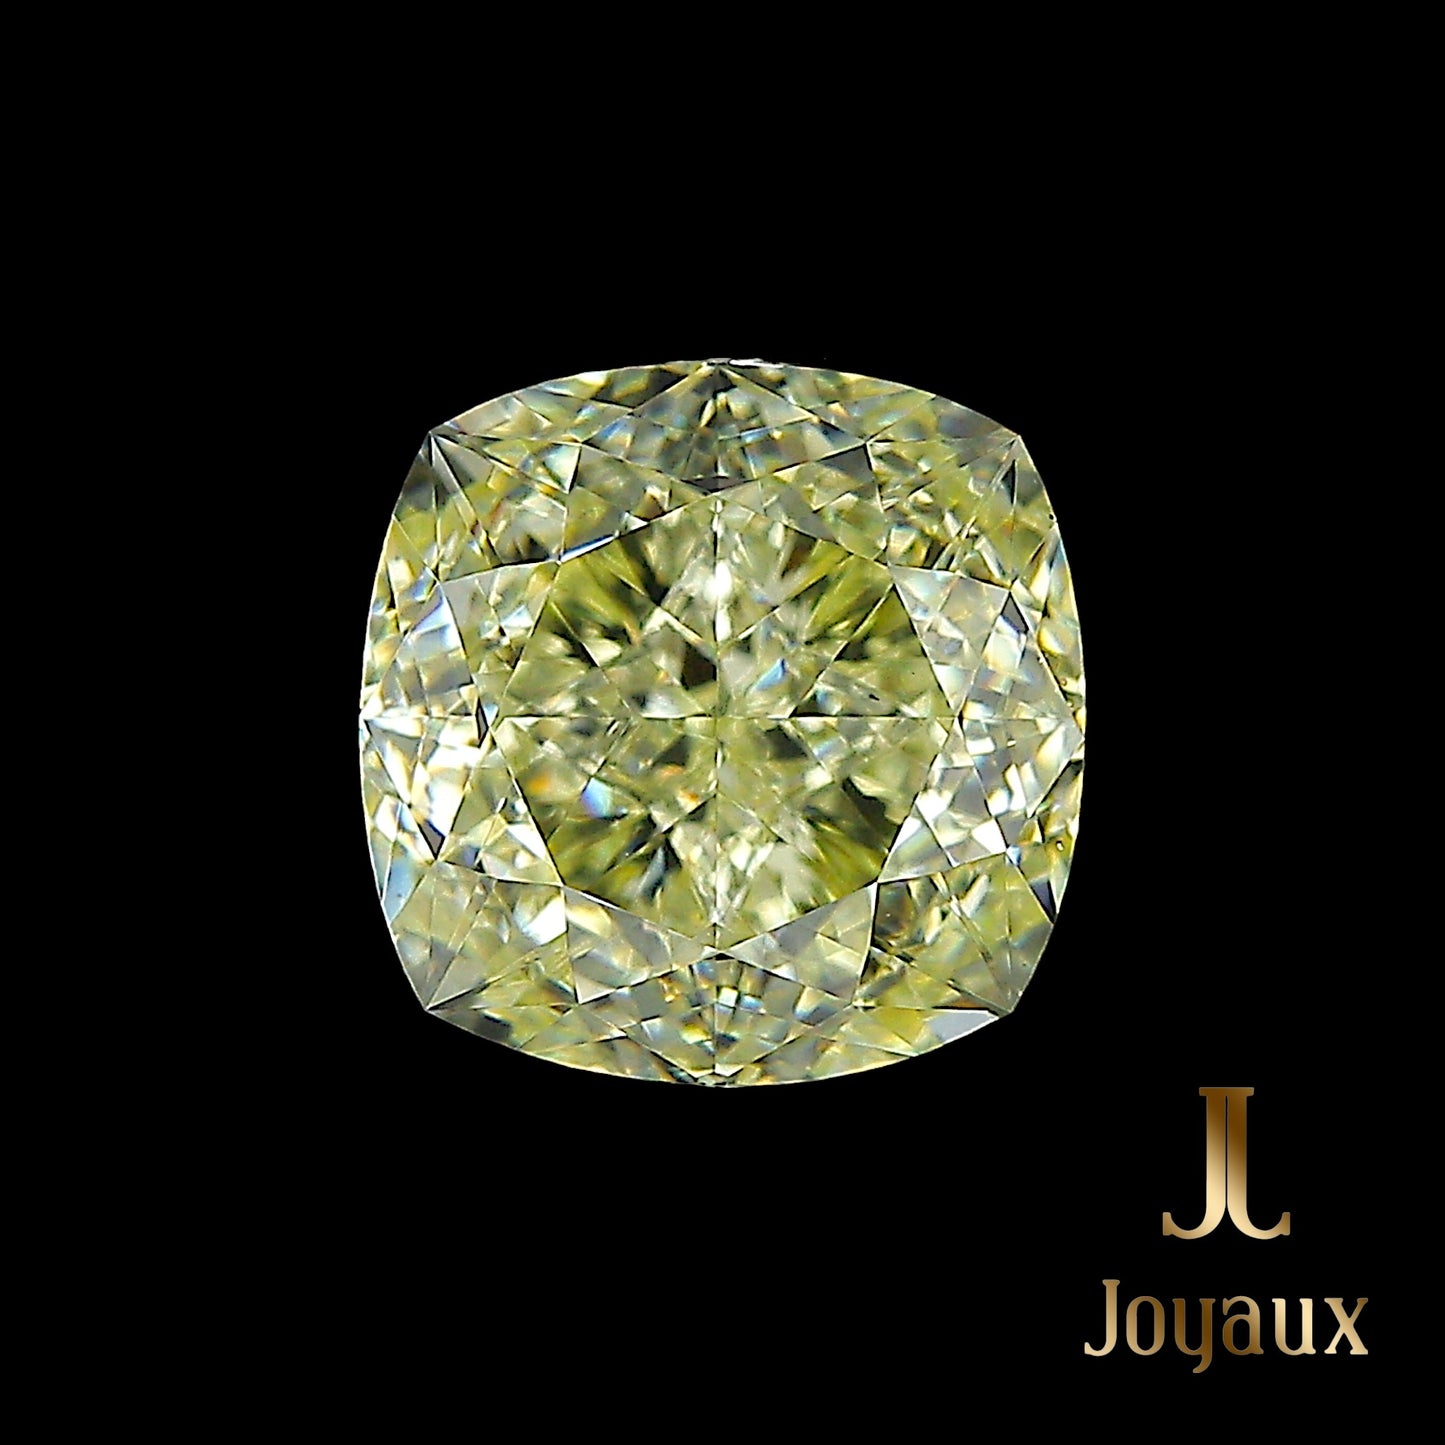 Discover the Majestic Beauty of a 2.66-Carat Fancy Light Yellow Diamond in Geneva